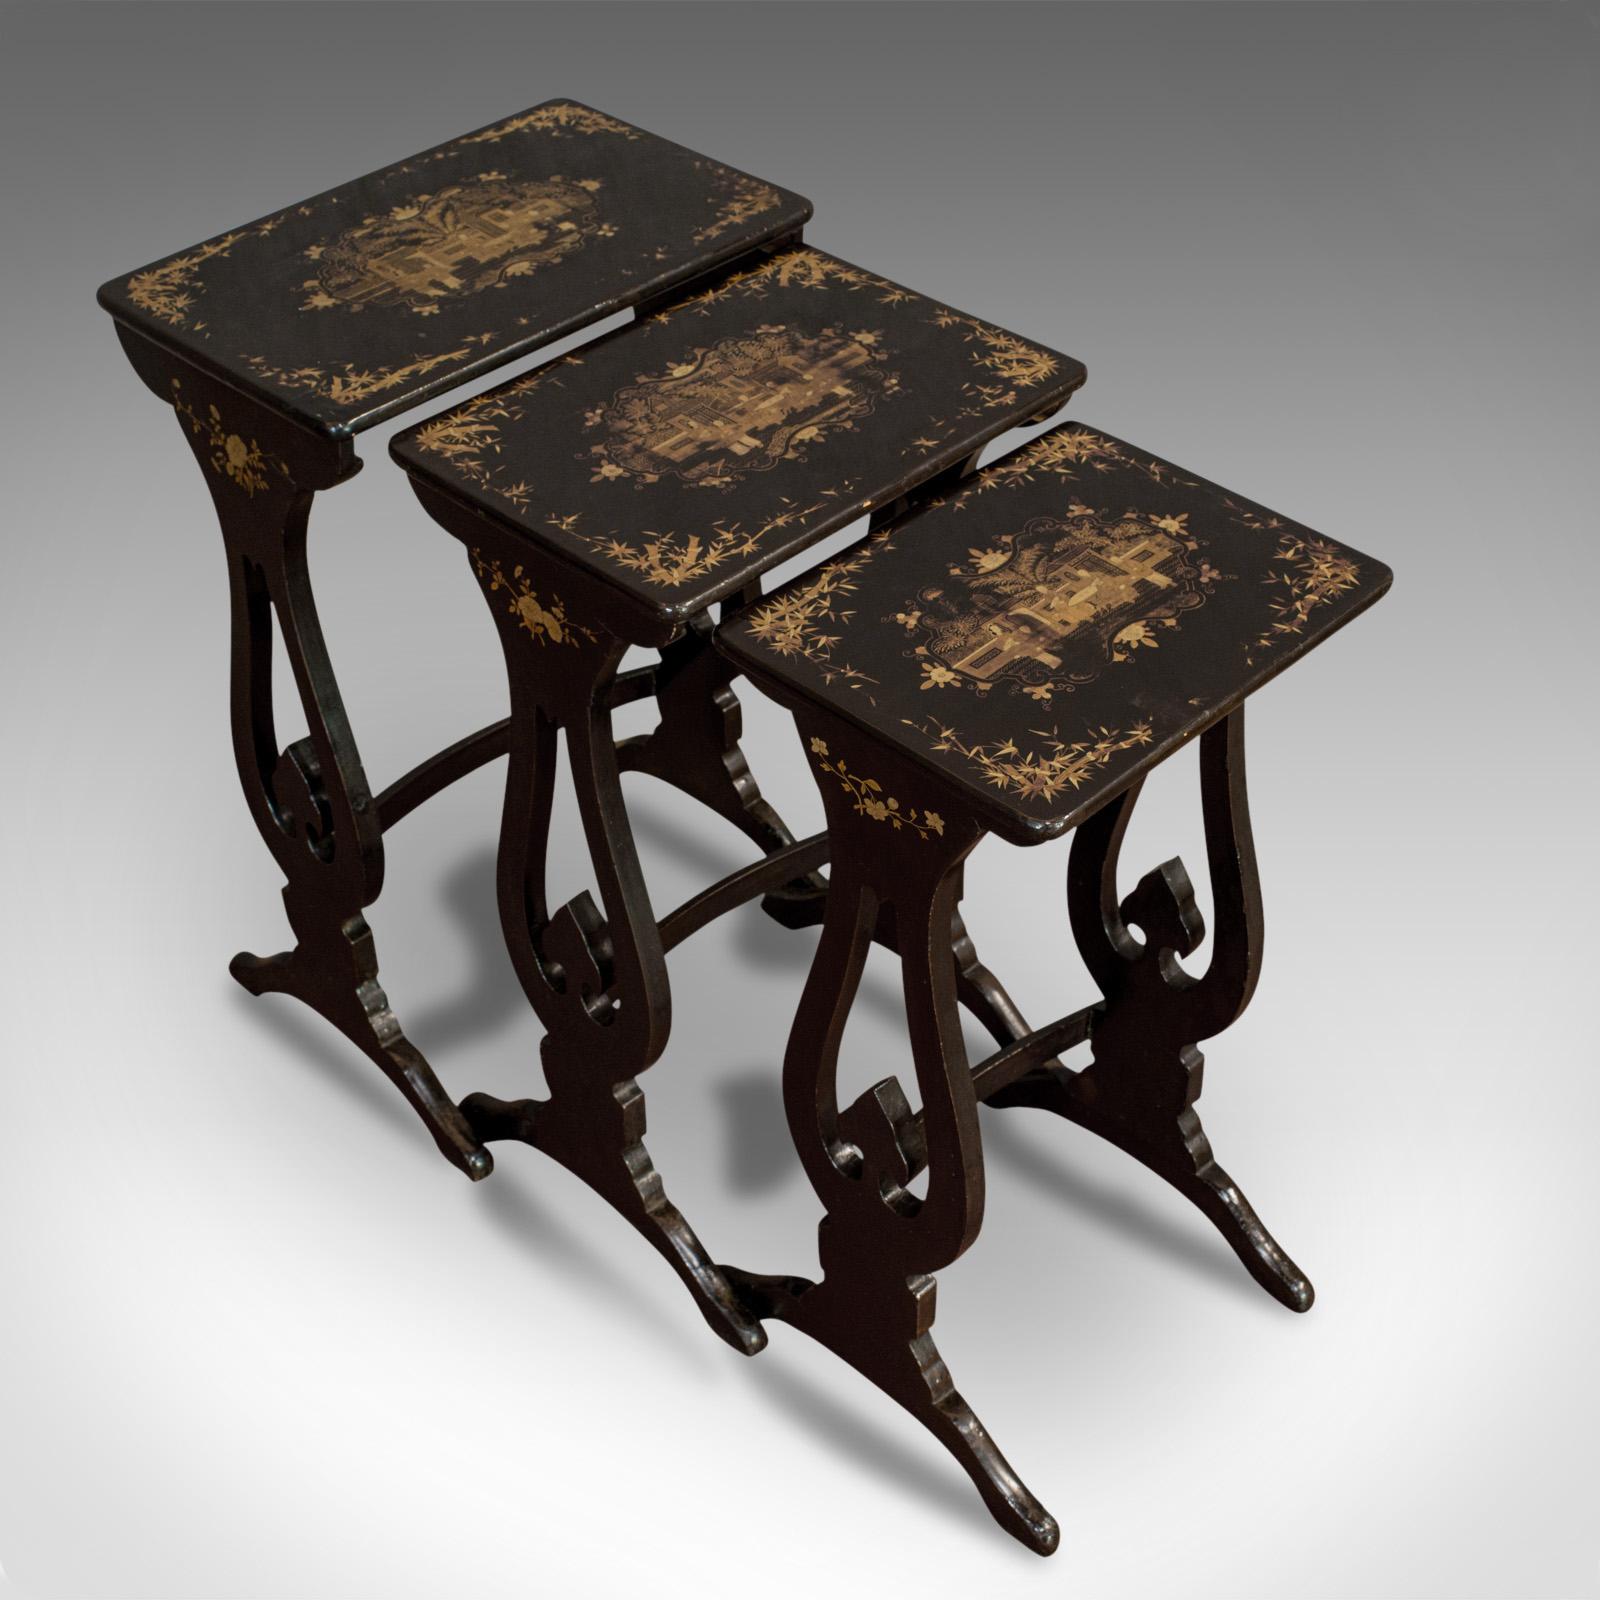 Wood Antique Nest of Occasional Tables, Oriental Trio Japanned, Victorian, circa 1880